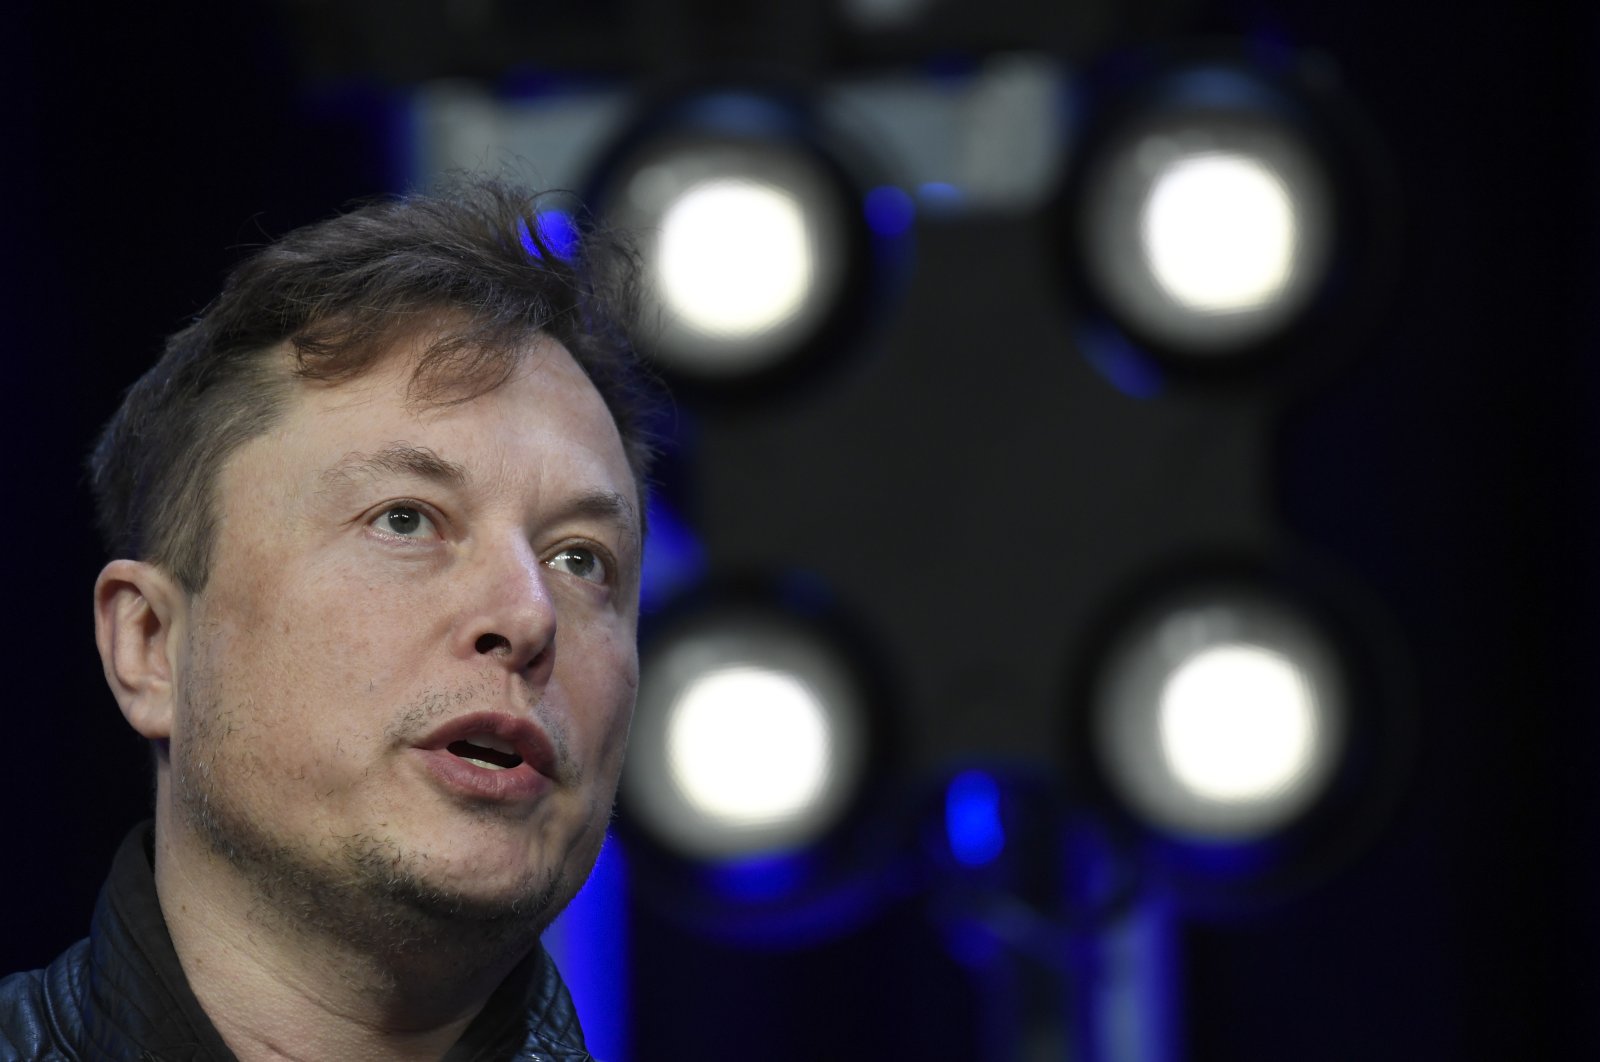 Tesla and SpaceX Chief Executive Officer Elon Musk speaks at the Satellite Conference and Exhibition in Washington, U.S., March 9, 2020. (AP Photo)